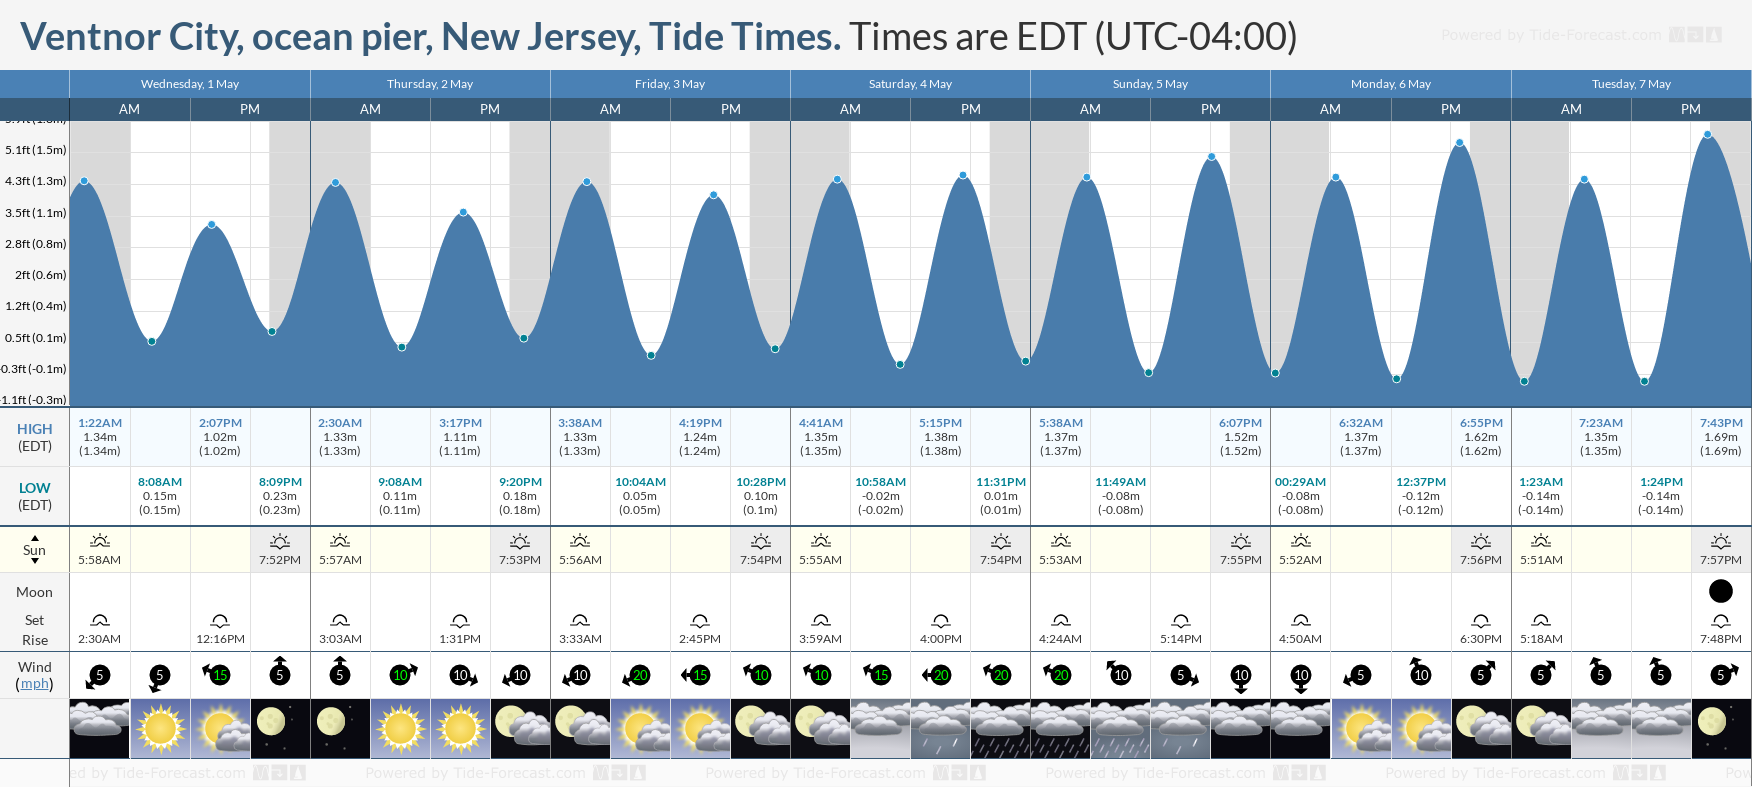 Ventnor City, ocean pier, New Jersey Tide Chart including high and low tide tide times for the next 7 days